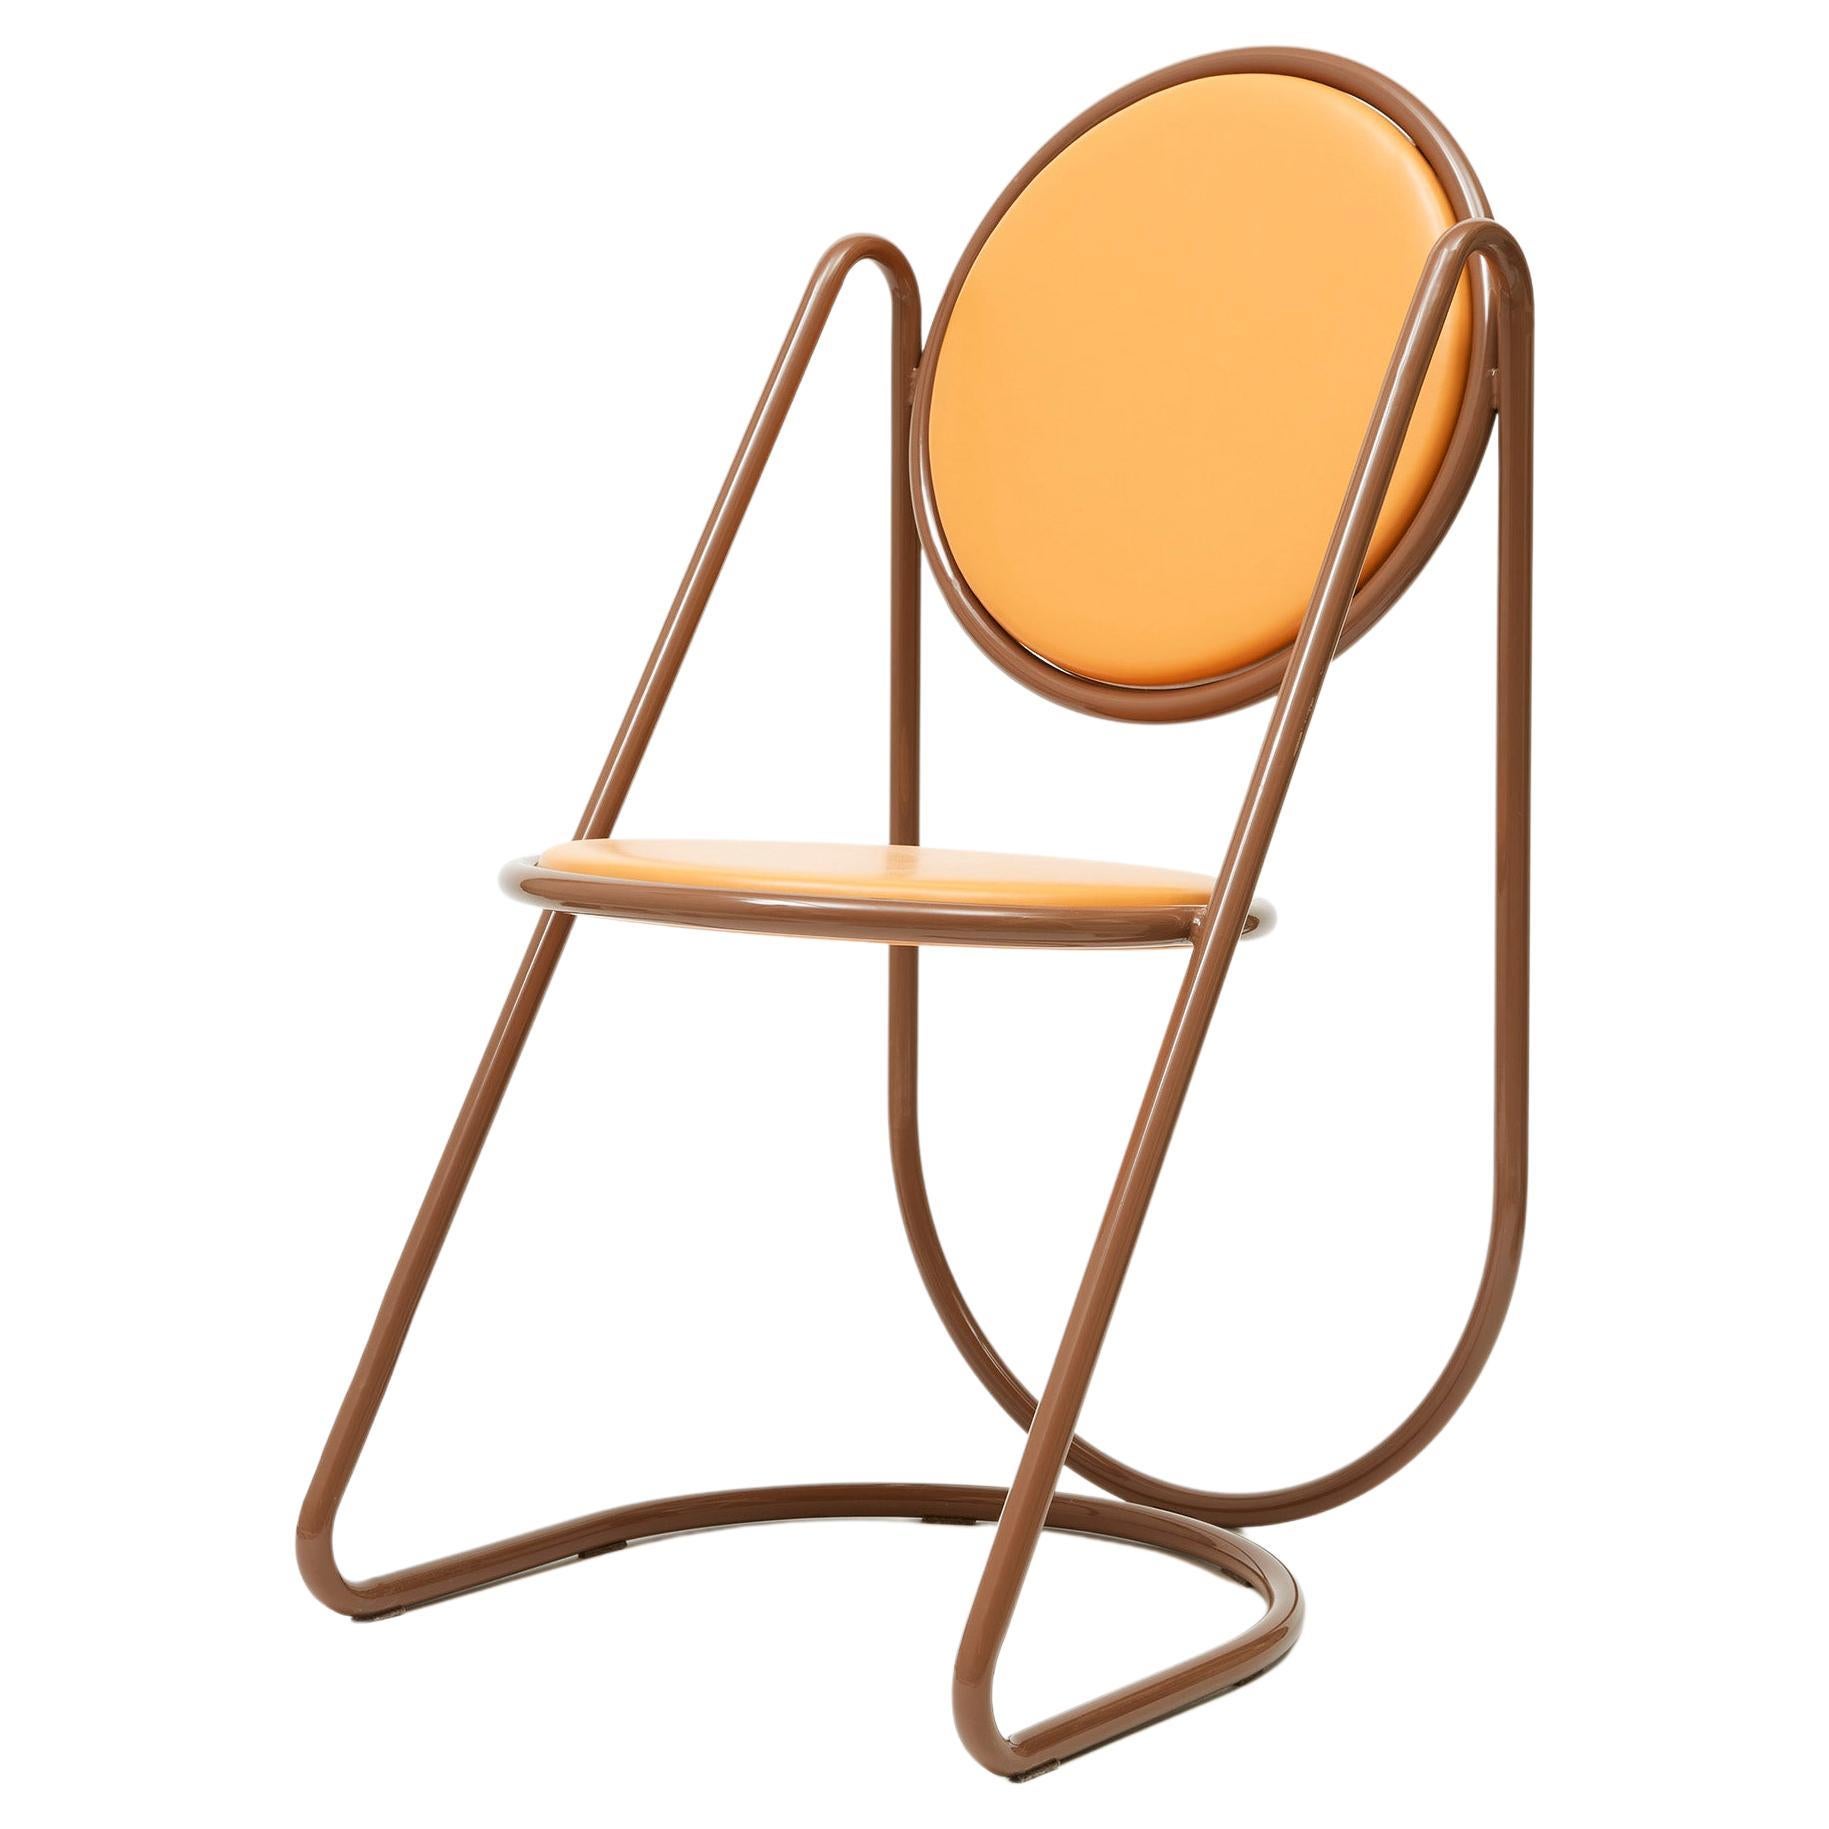 Dramatic and sculptural, this chair from the U-Disk Collection is sure to capture attention wherever it is placed. A natural addition to a retro-inspired decor, it consists of a continuous, cleverly bent tubular structure in brown-lacquered steel